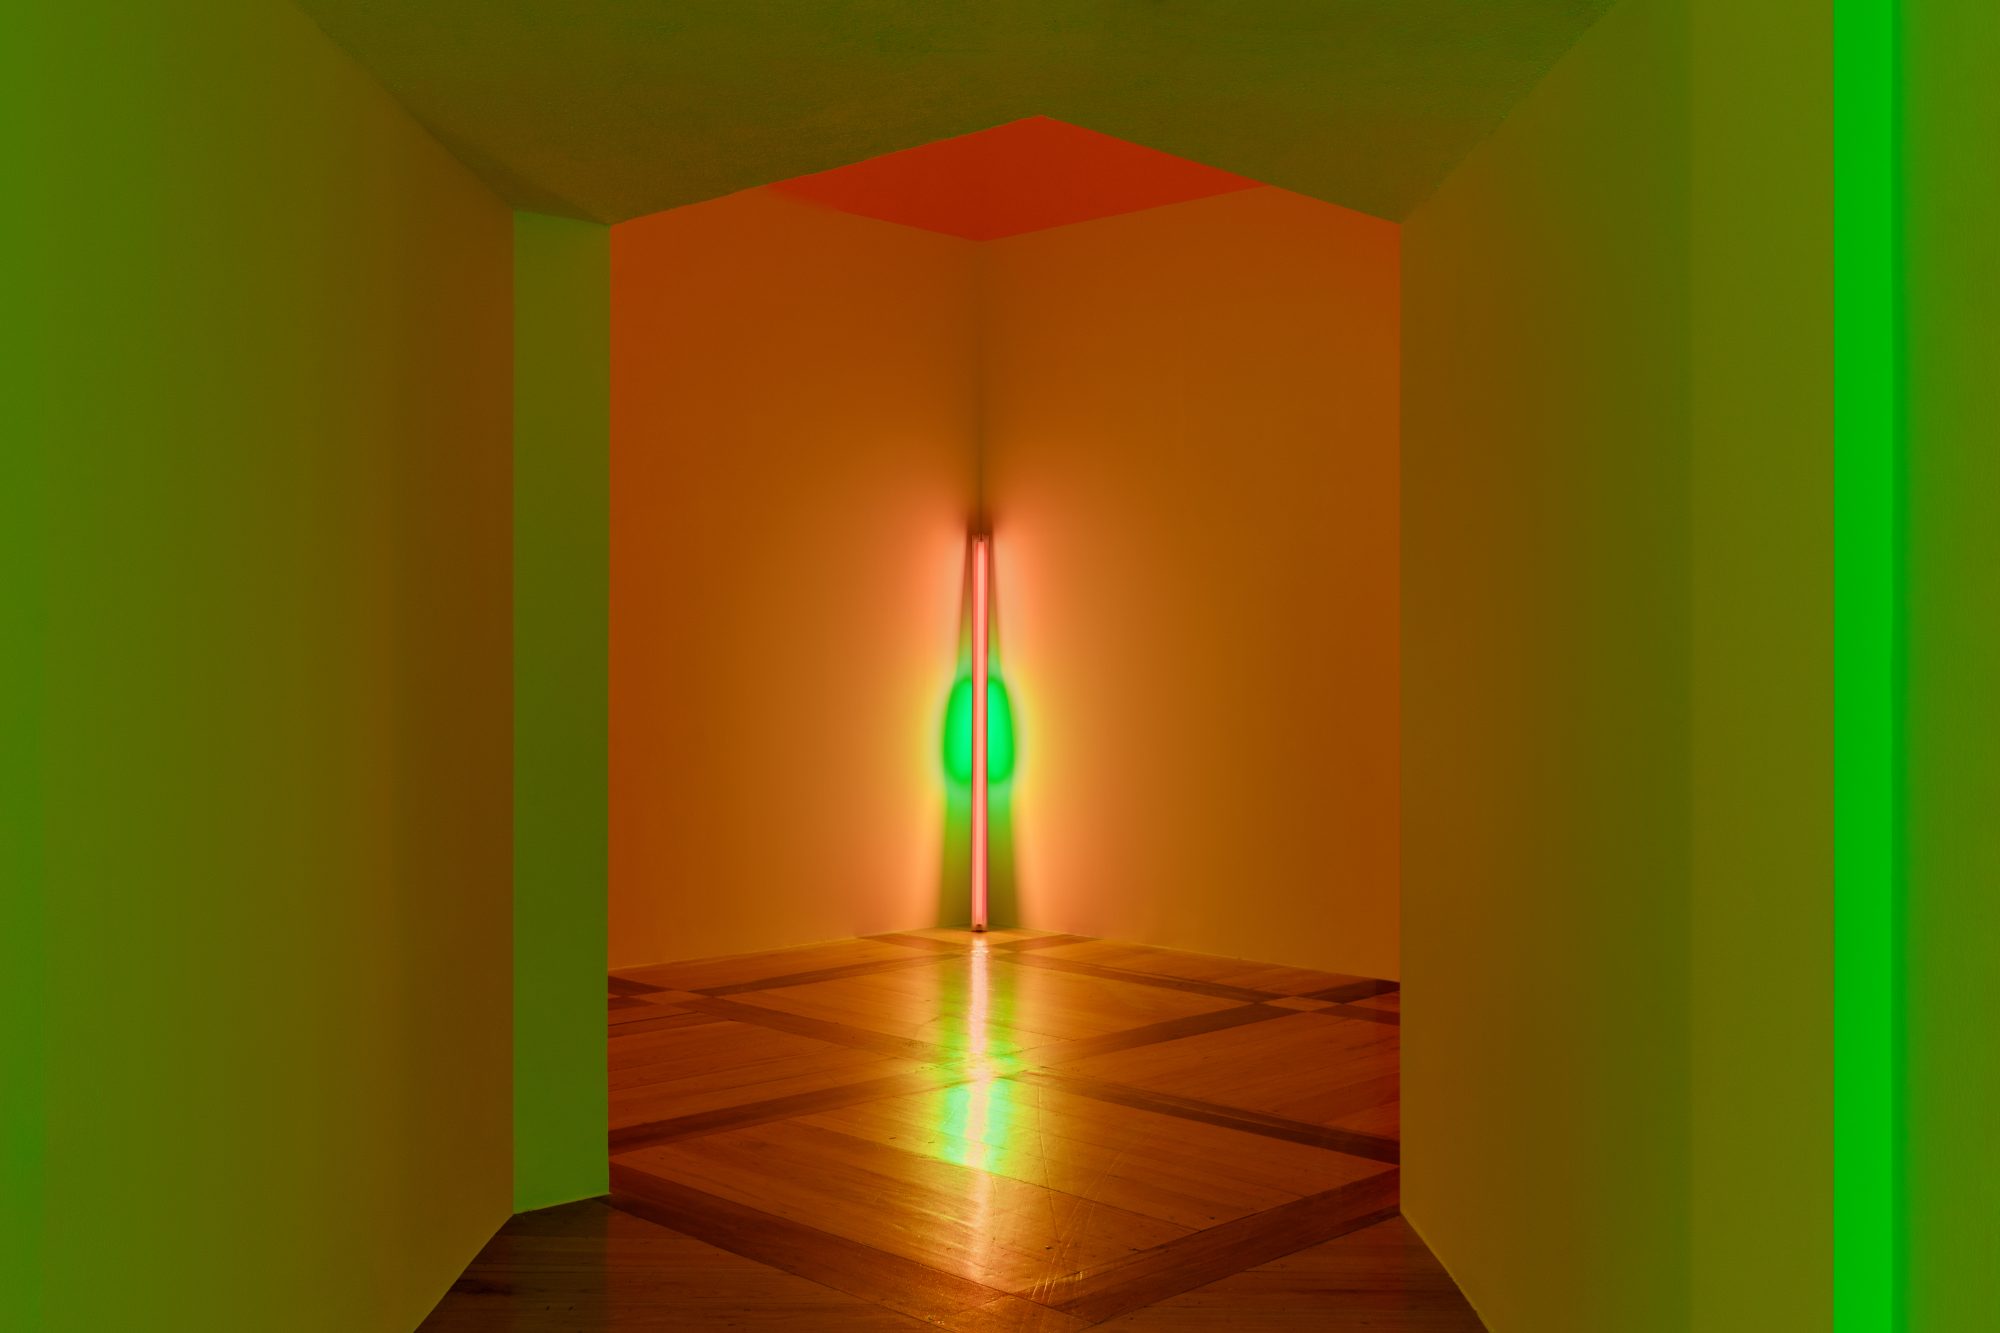 Dan Flavin: Works from the DIA Art Foundation Collection